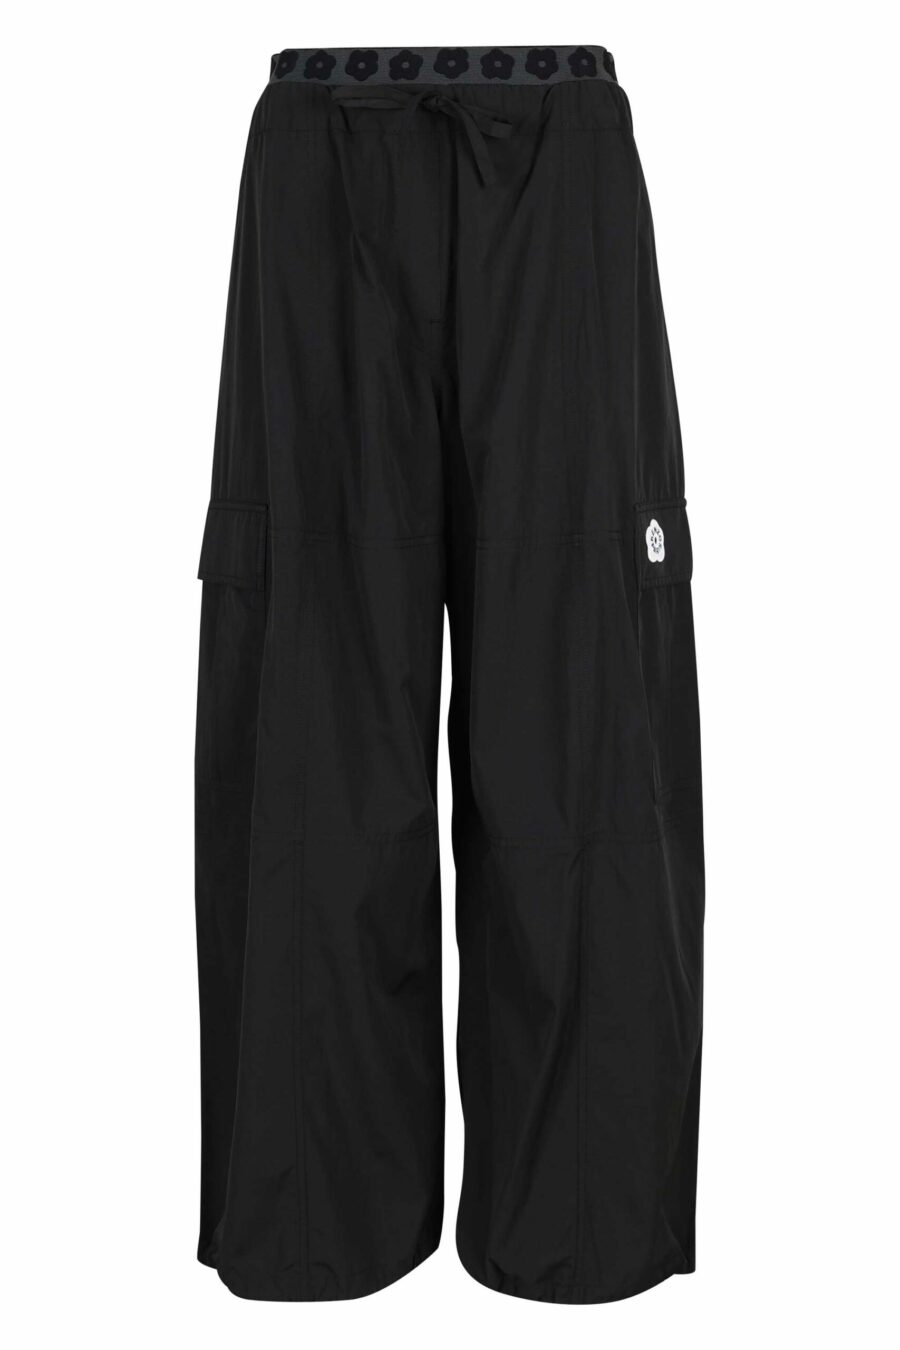 Black cargo trousers with "boke flower" logo - 3612230658301 scaled